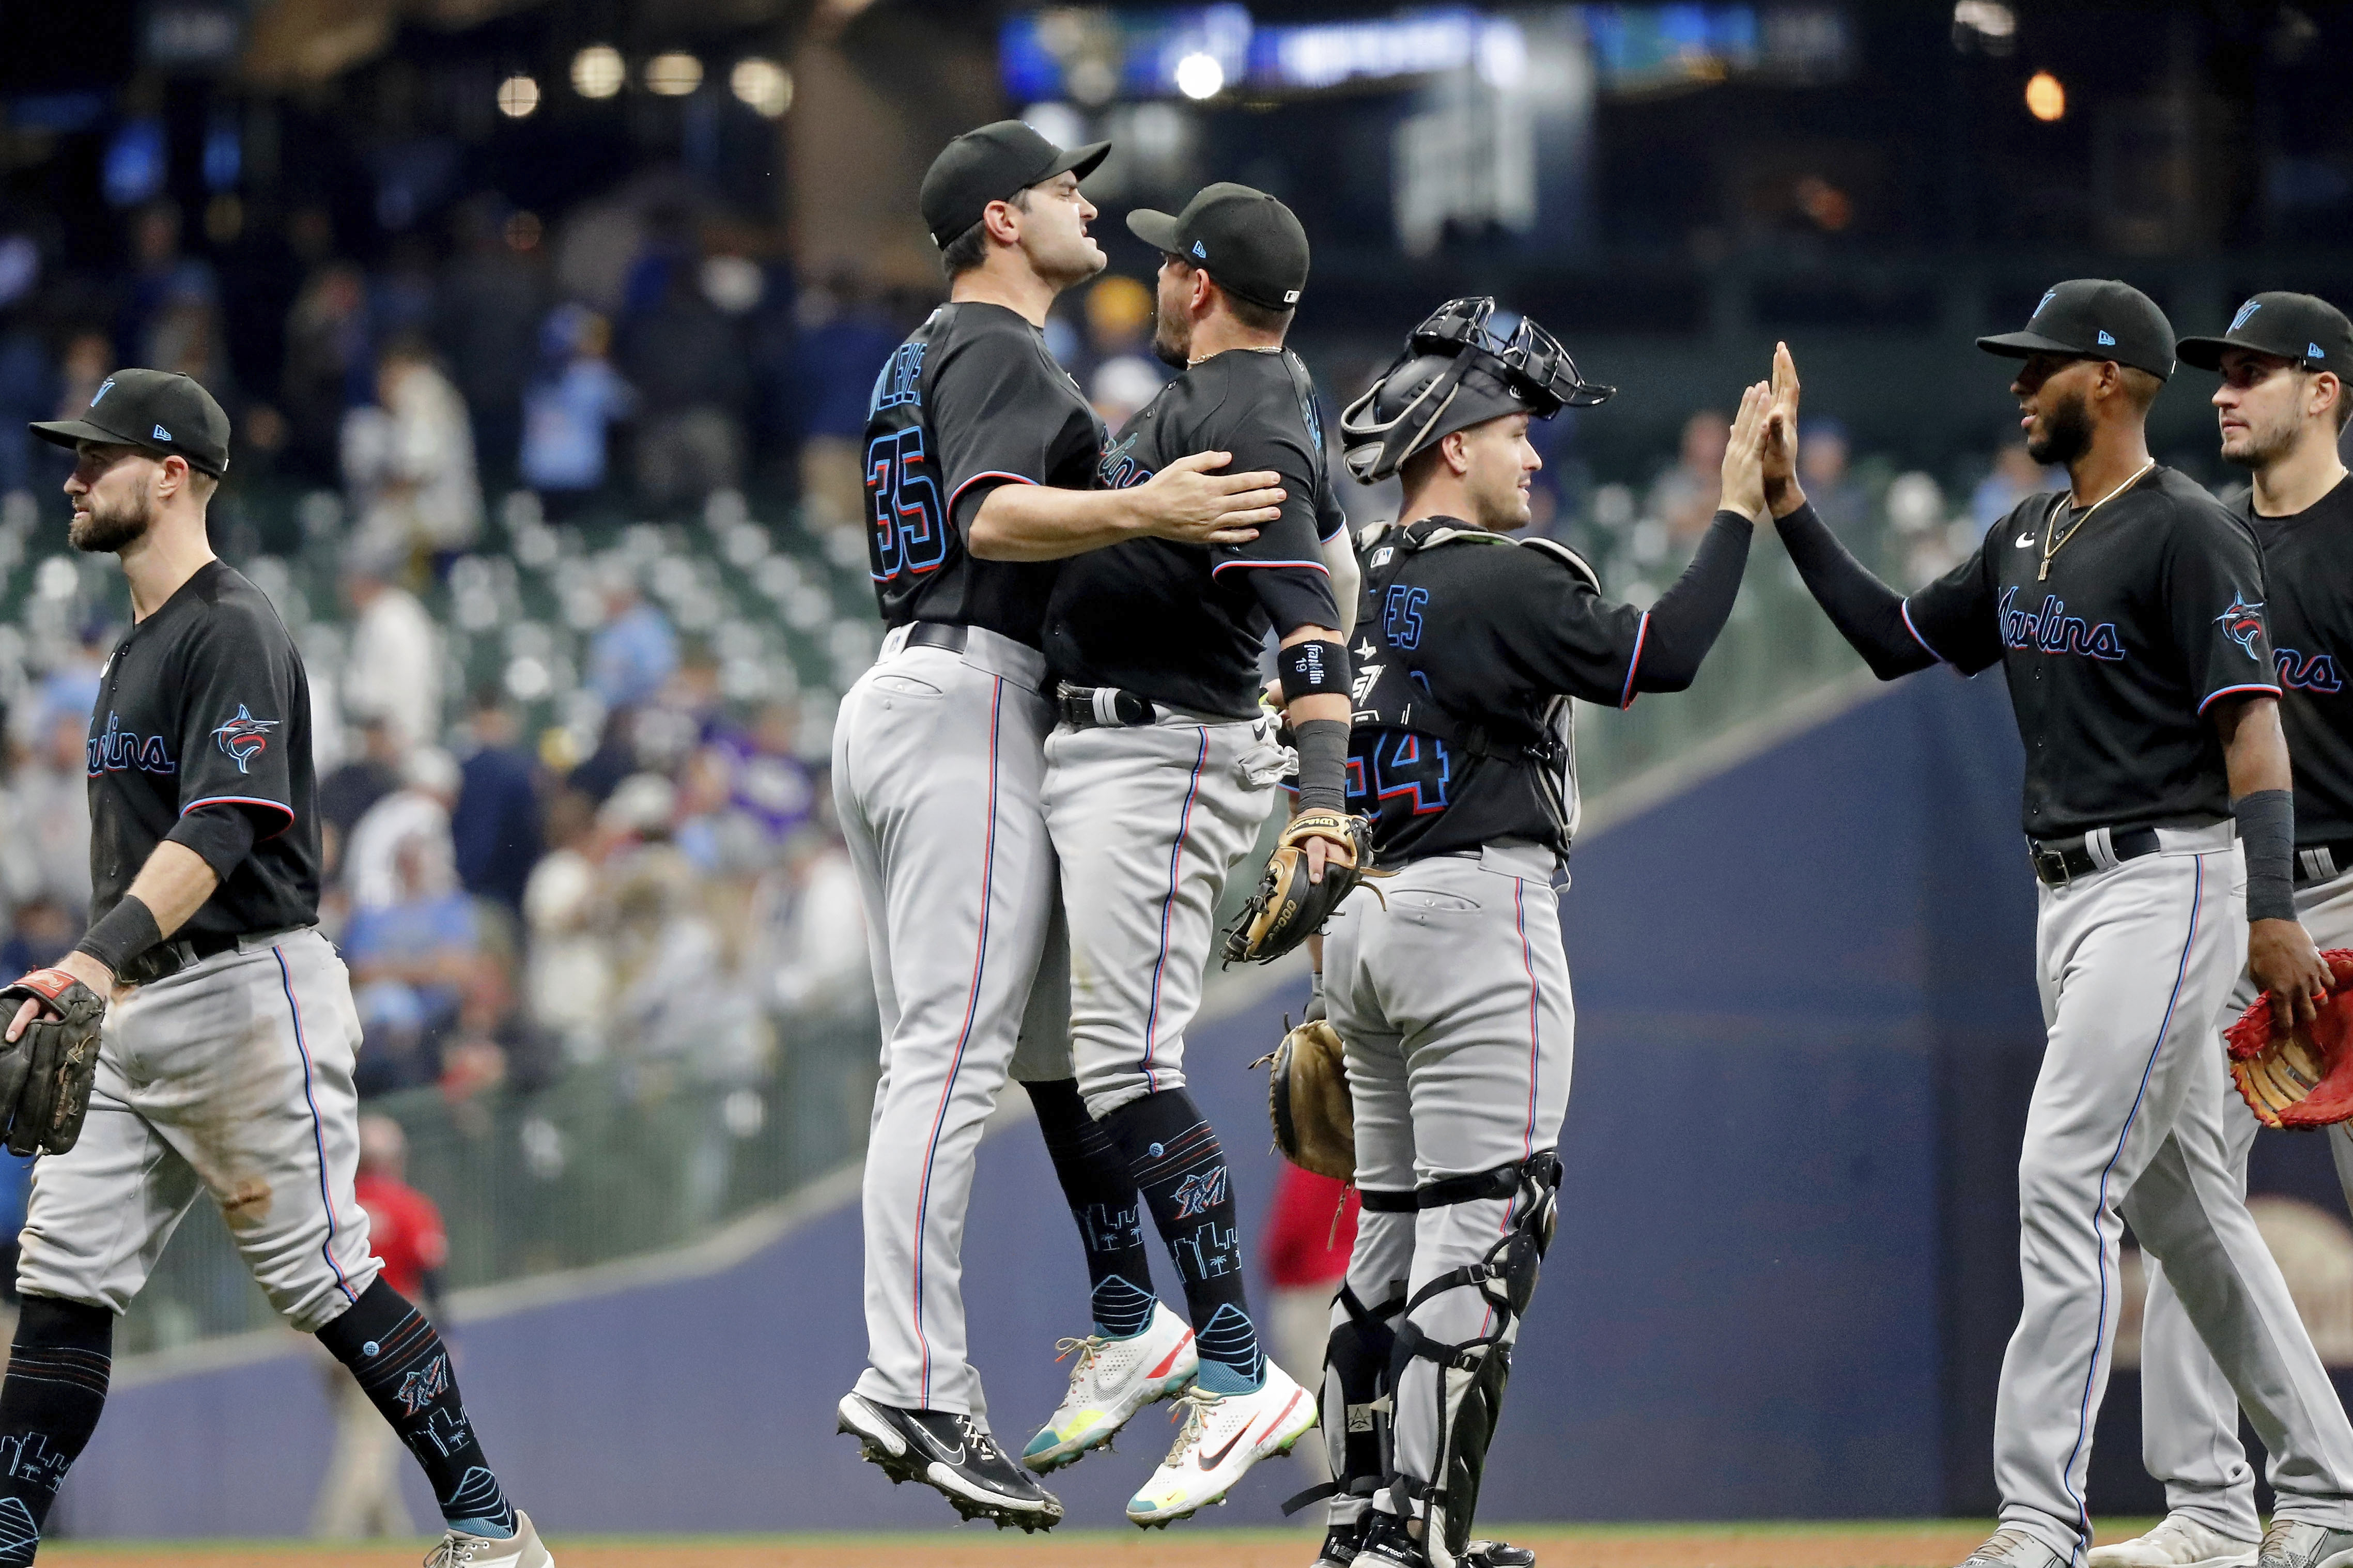 Braves miss chance to clinch, Marlins game